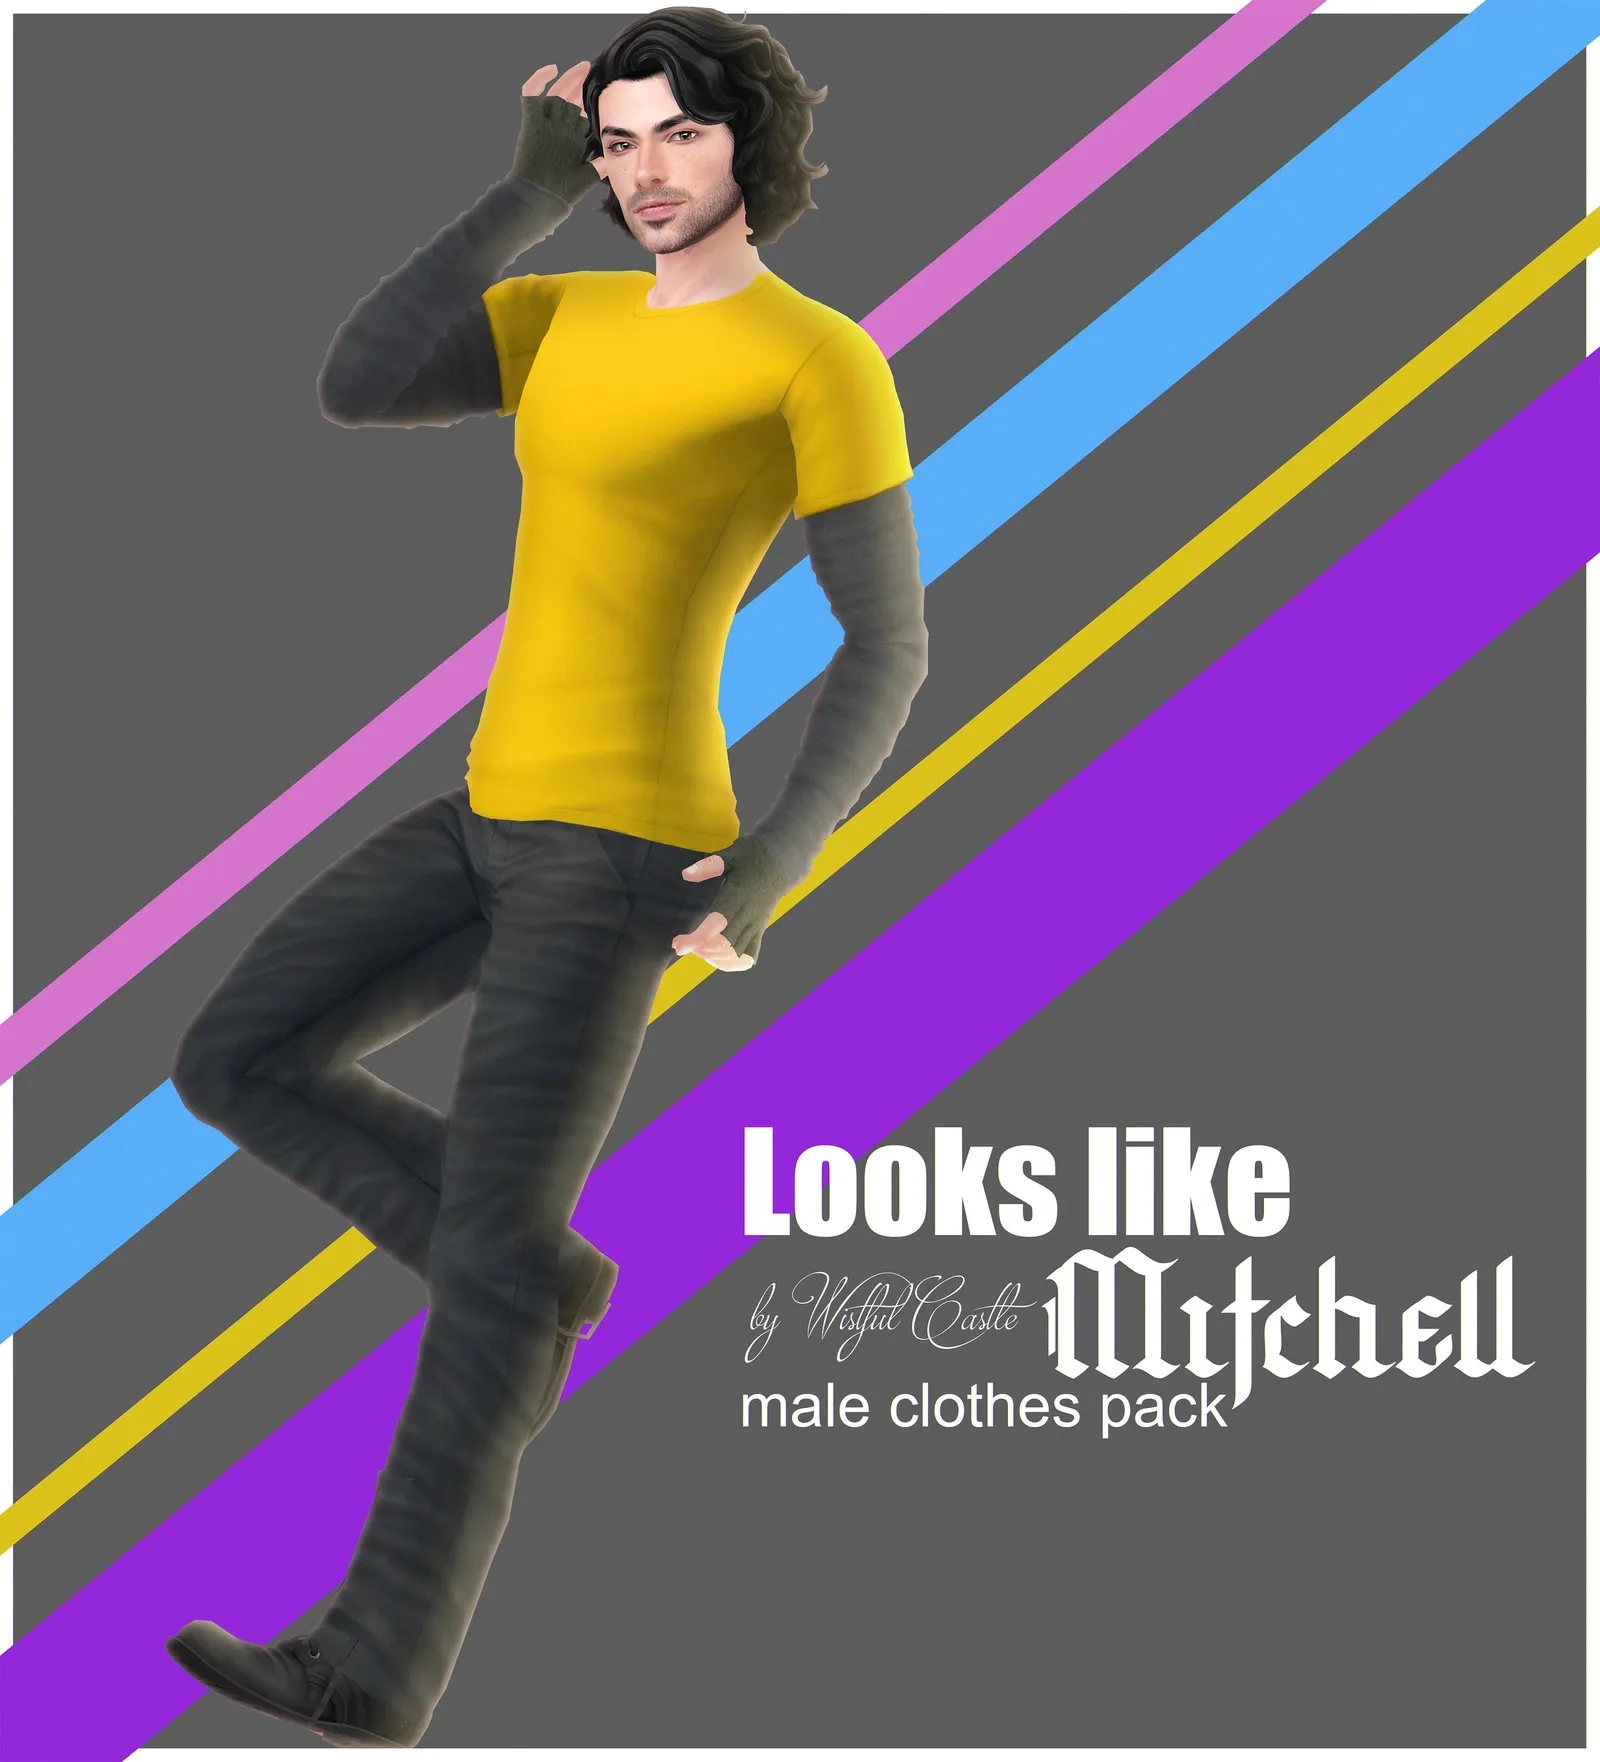 Looks like Mitchell (clothes pack)